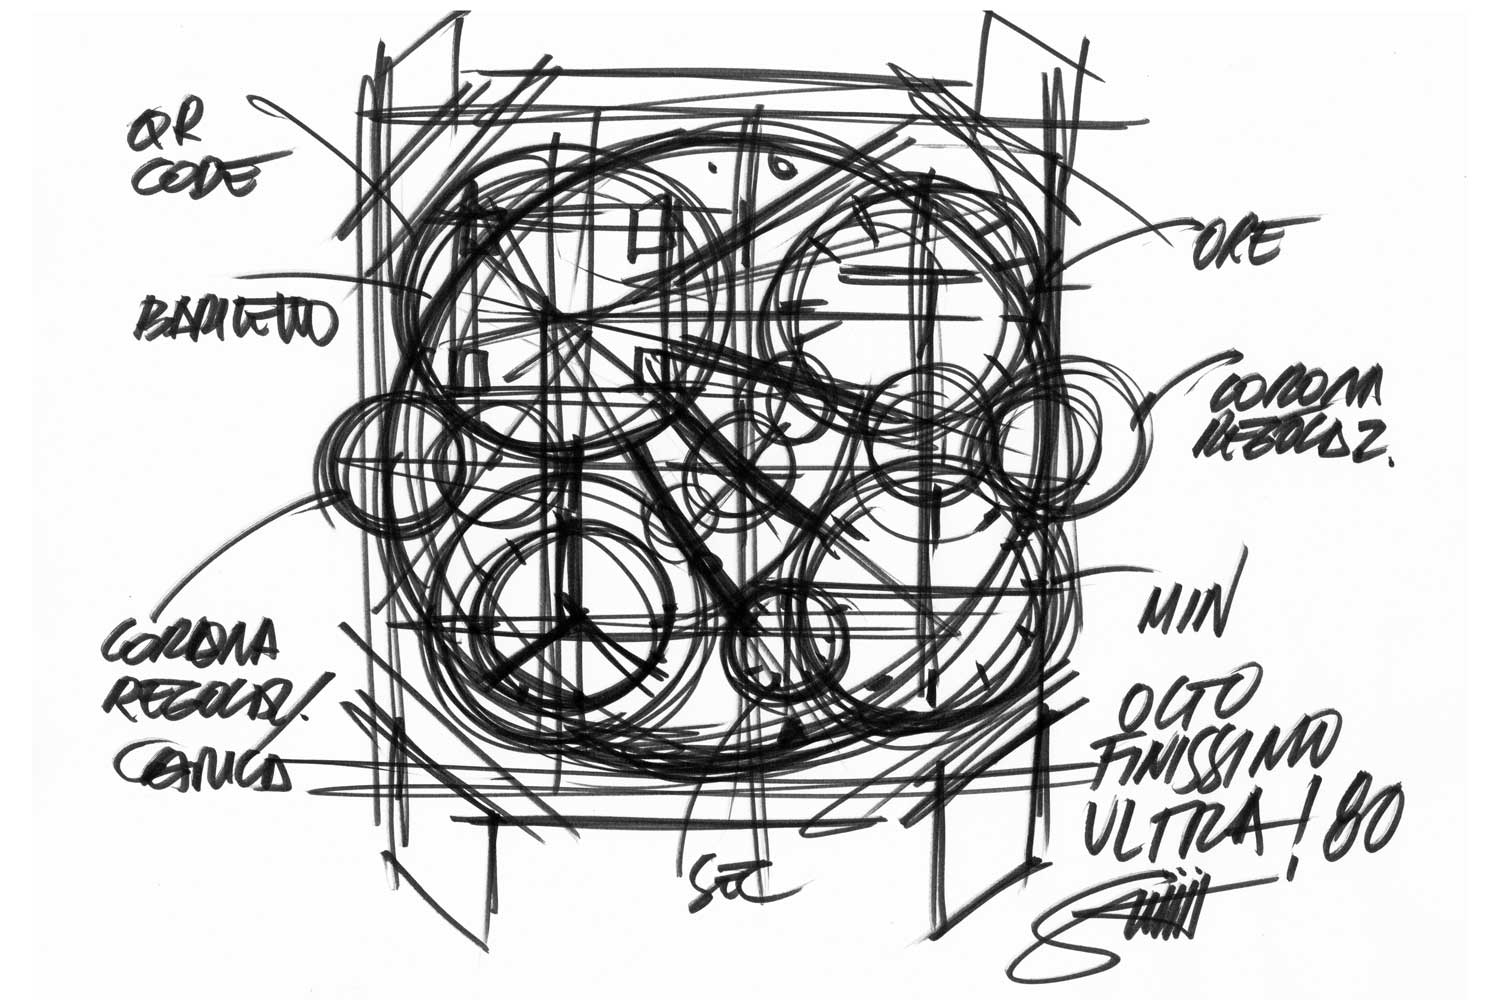 A design sketch of the dial layout where the barrel is the focal point